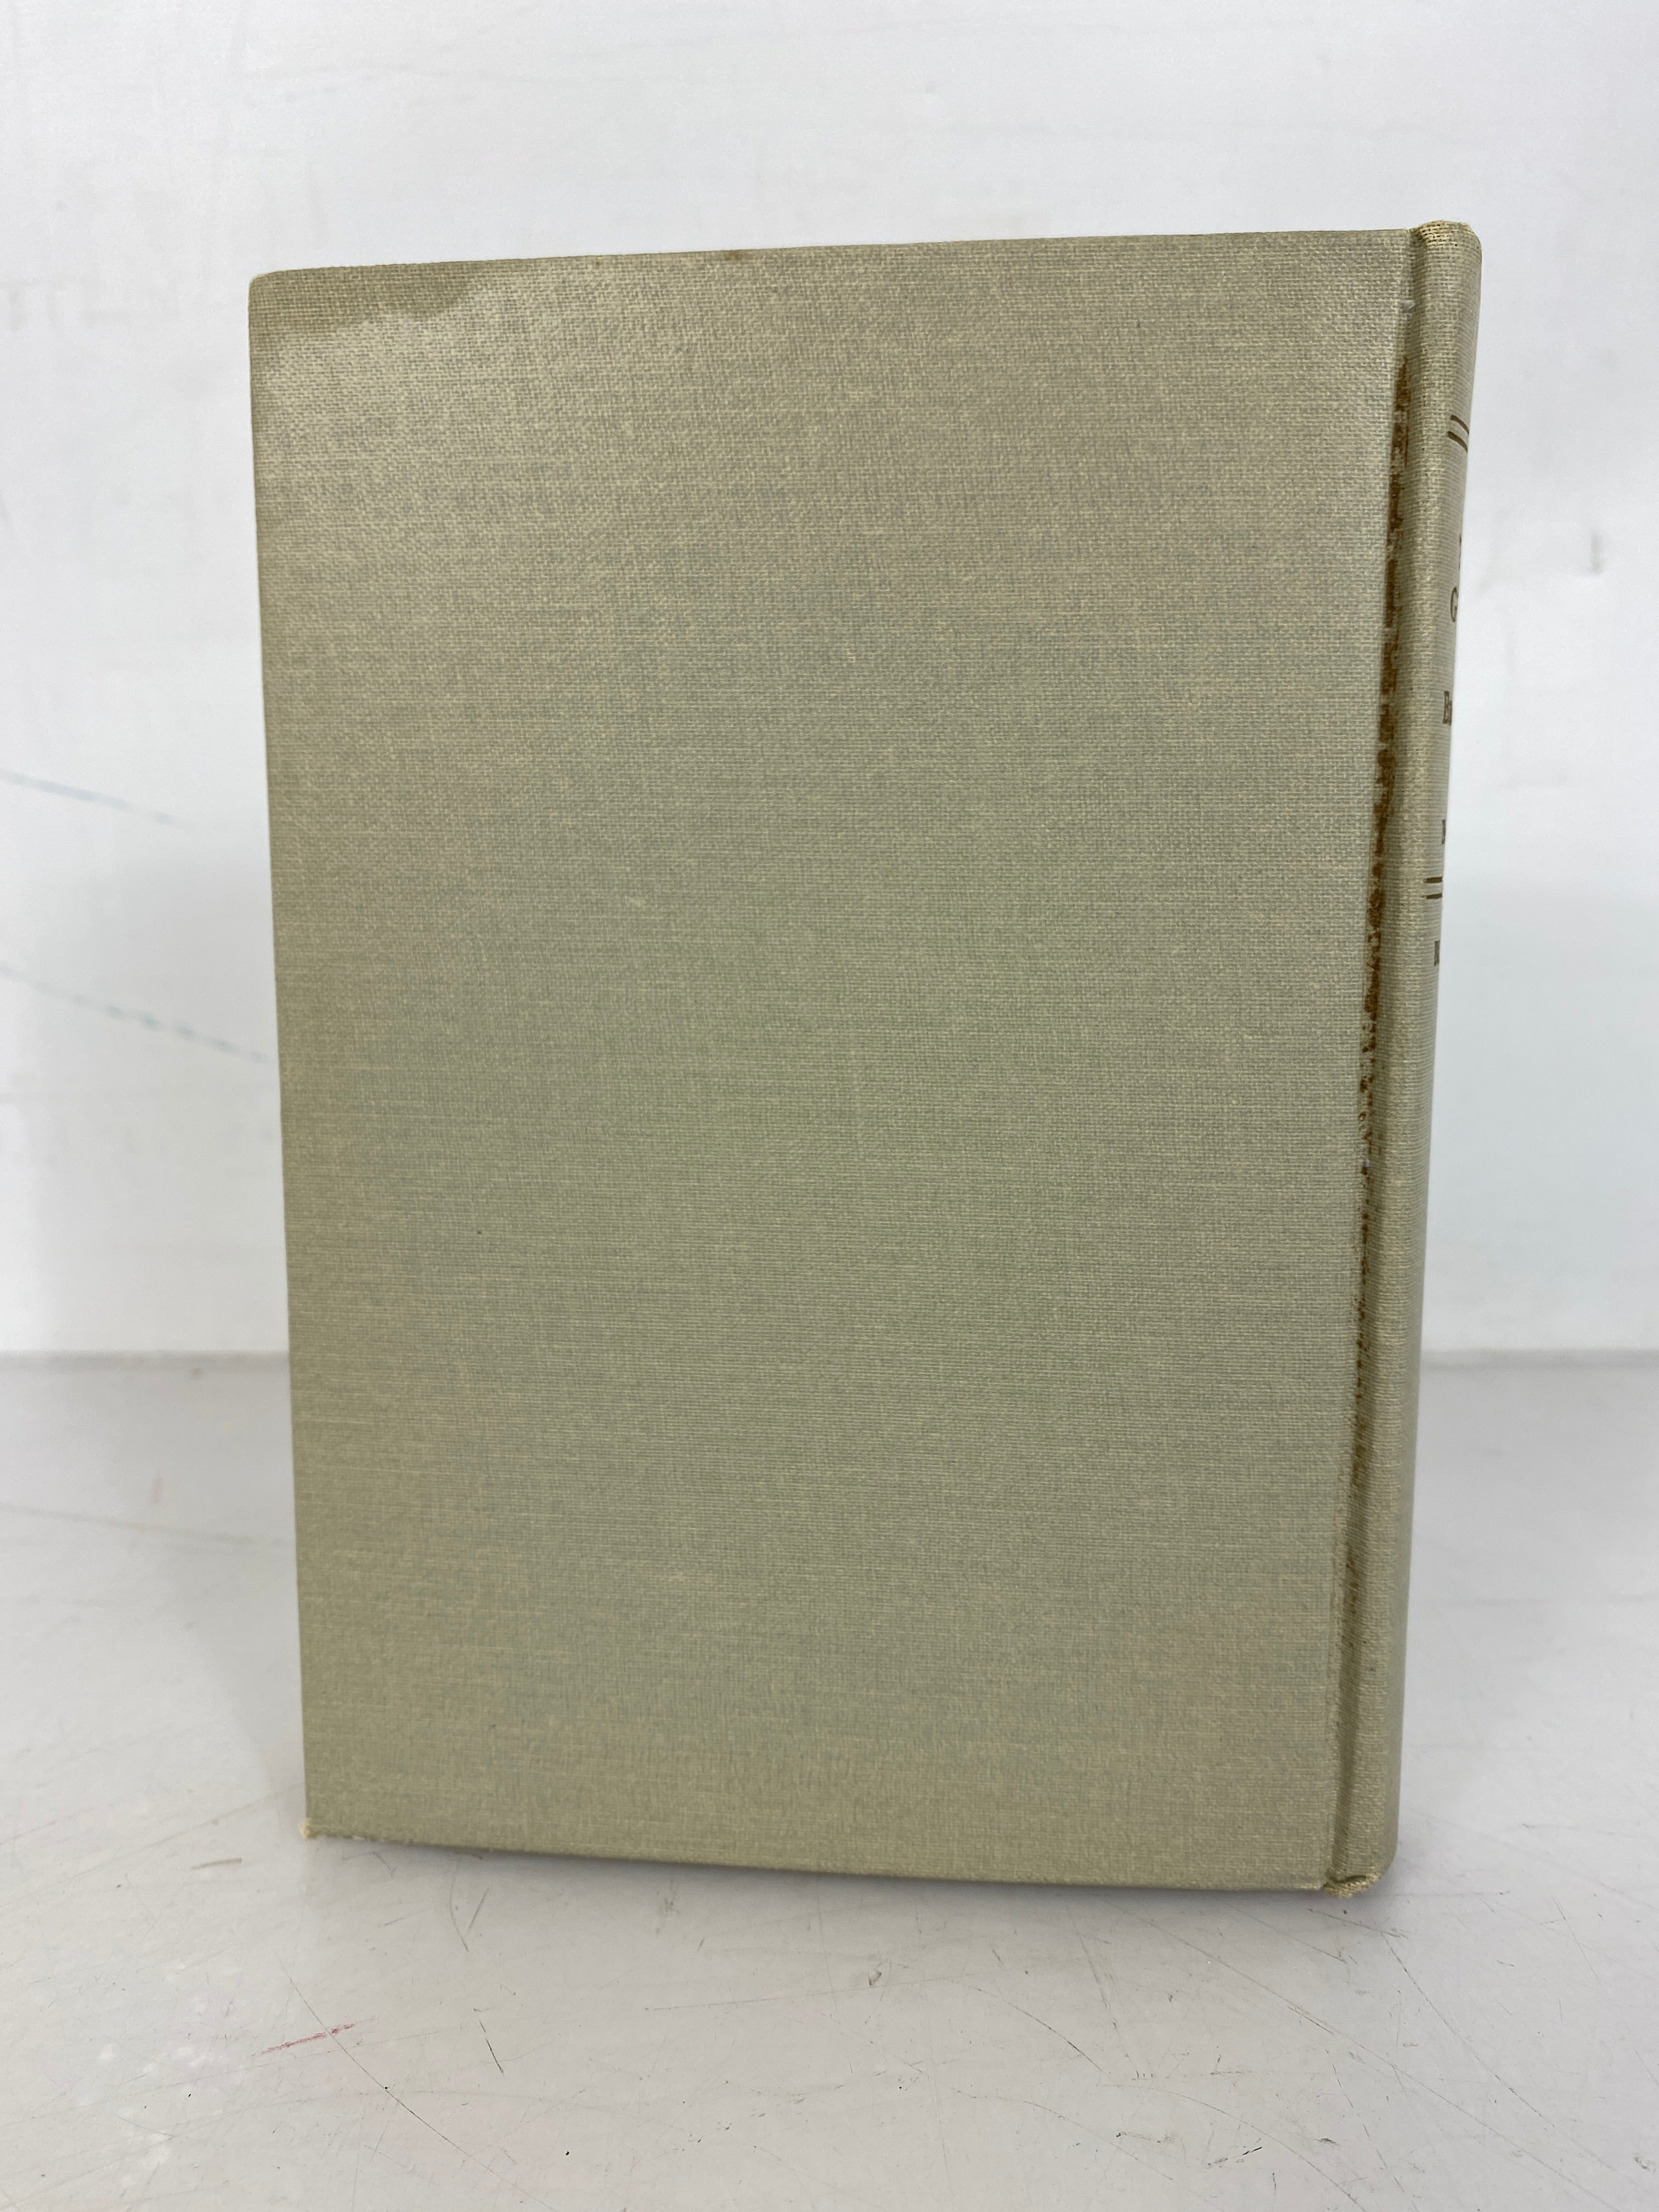 Early Edition Classic A Tree Grows in Brooklyn by Betty Smith 1943 HC DJ